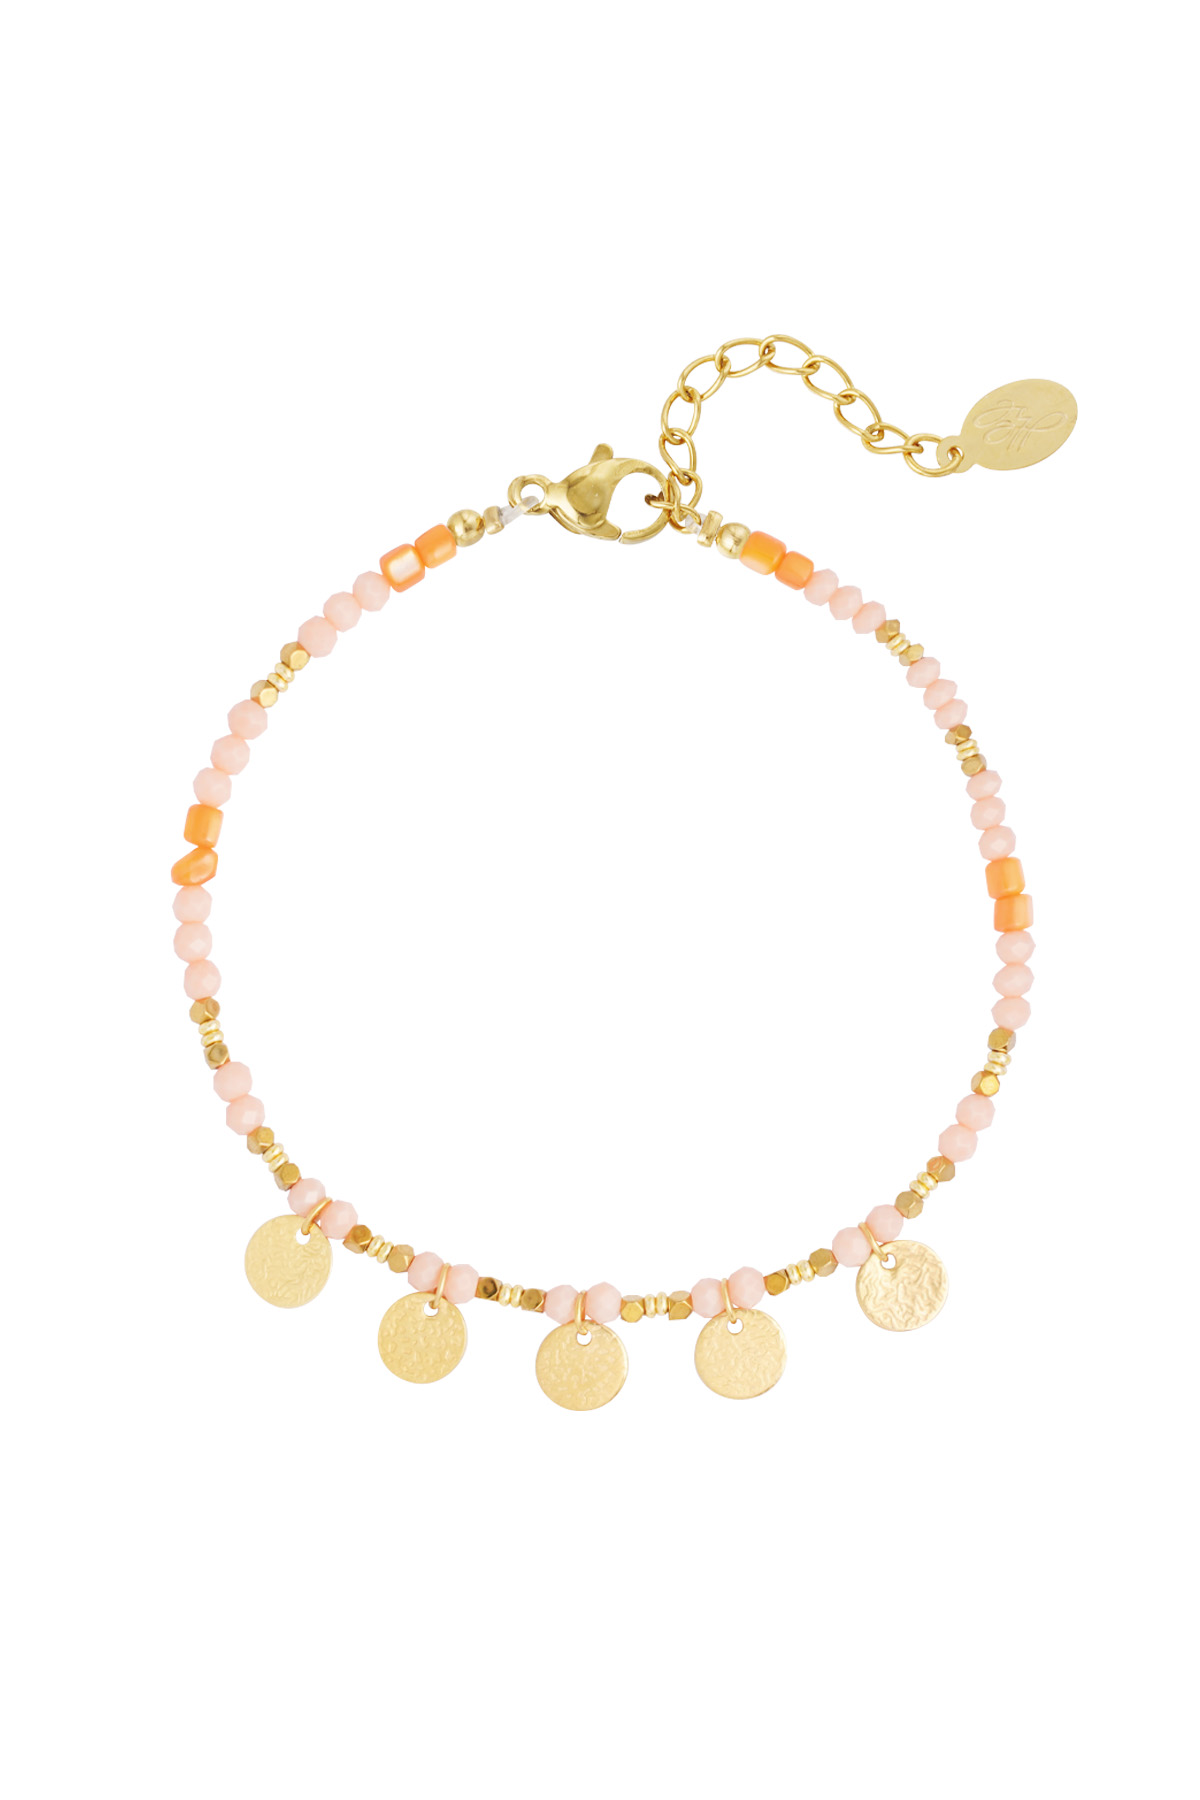 Bead bracelet with coin charms - orange/gold